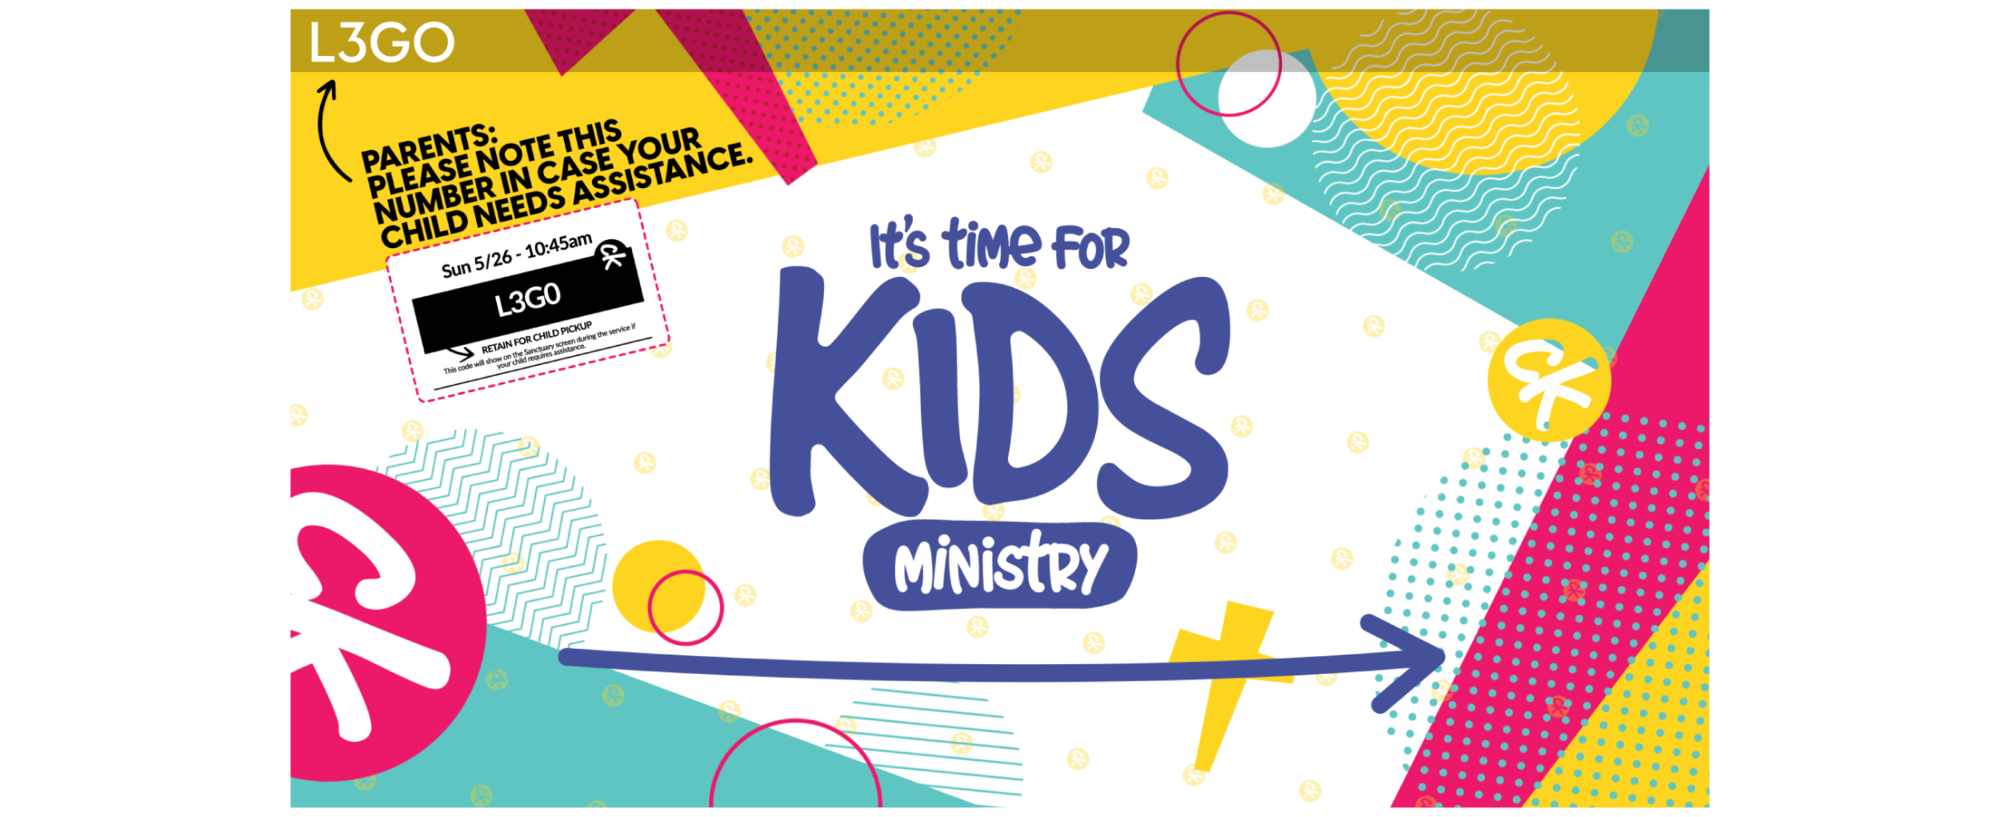 Central Kids Ministry Parent Call System